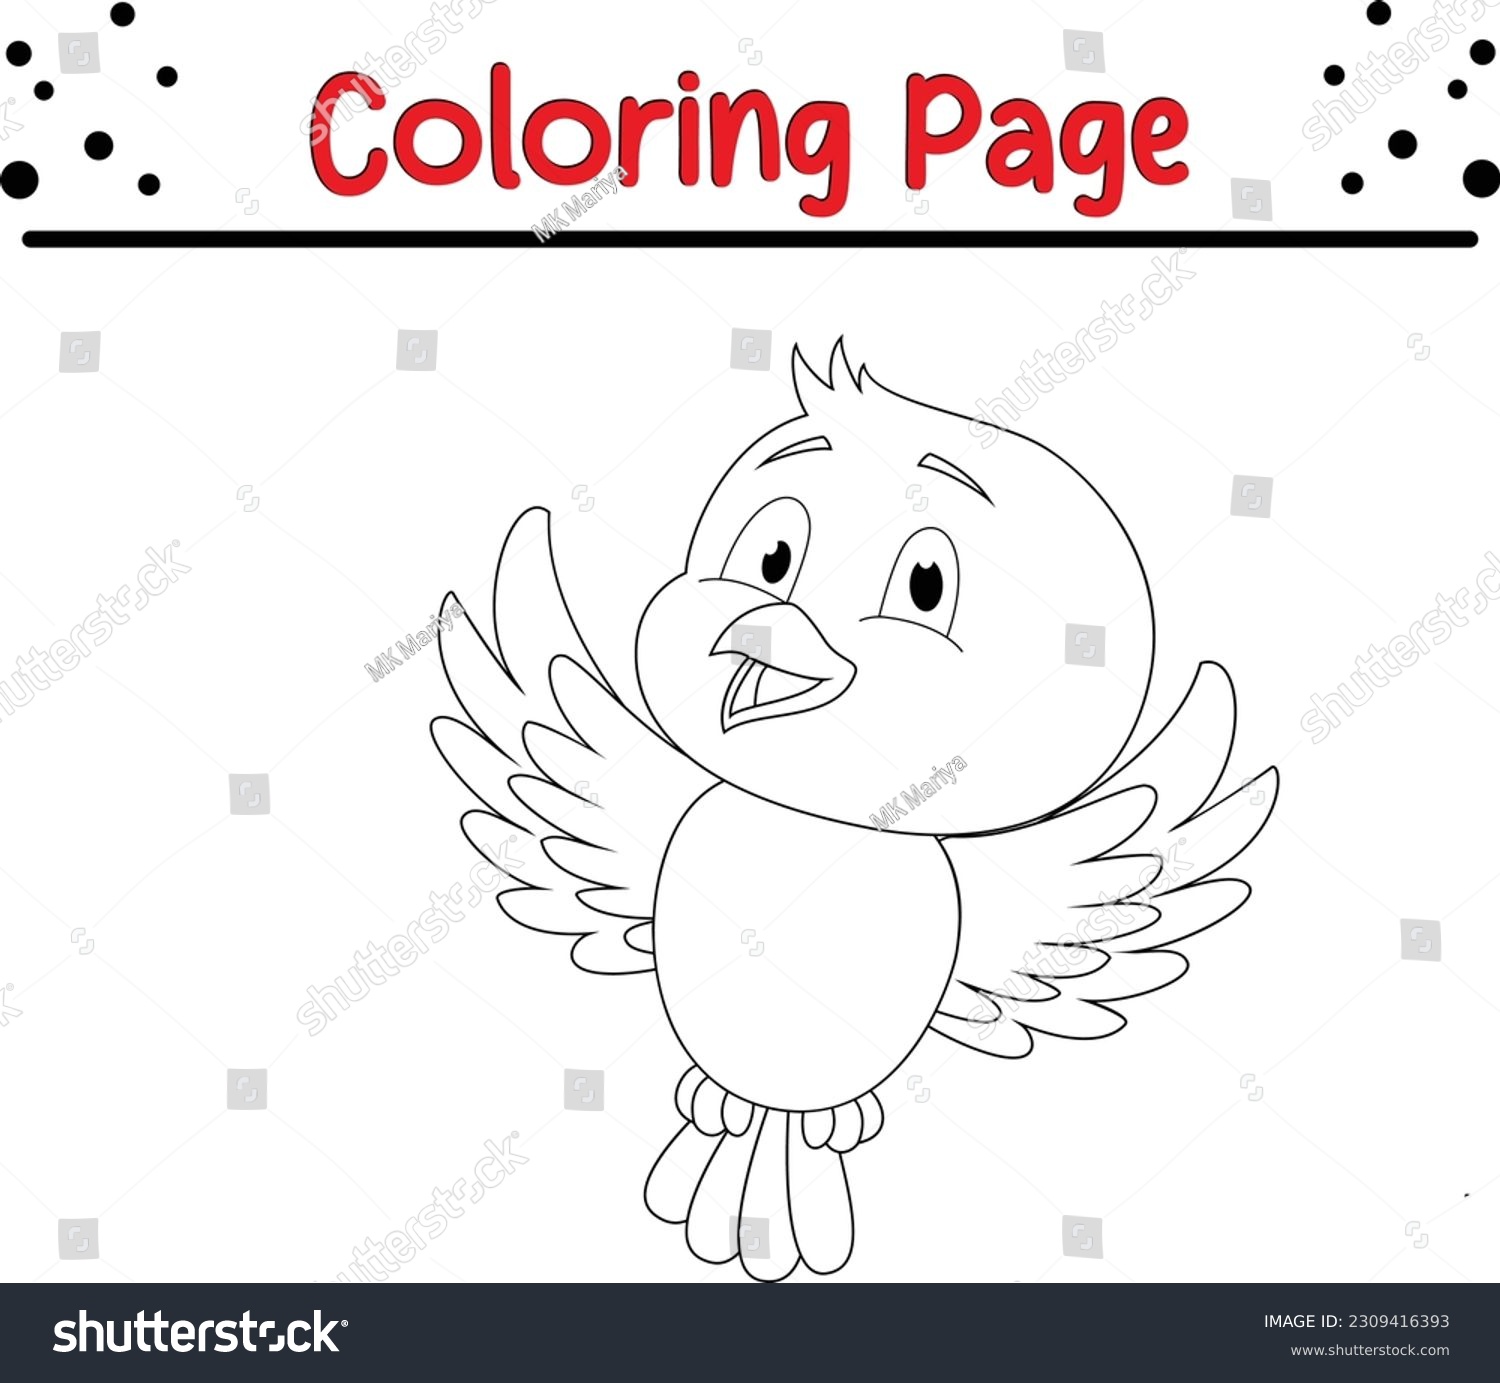 Cute nightingale cartoon coloring page illustration stock vector royalty free